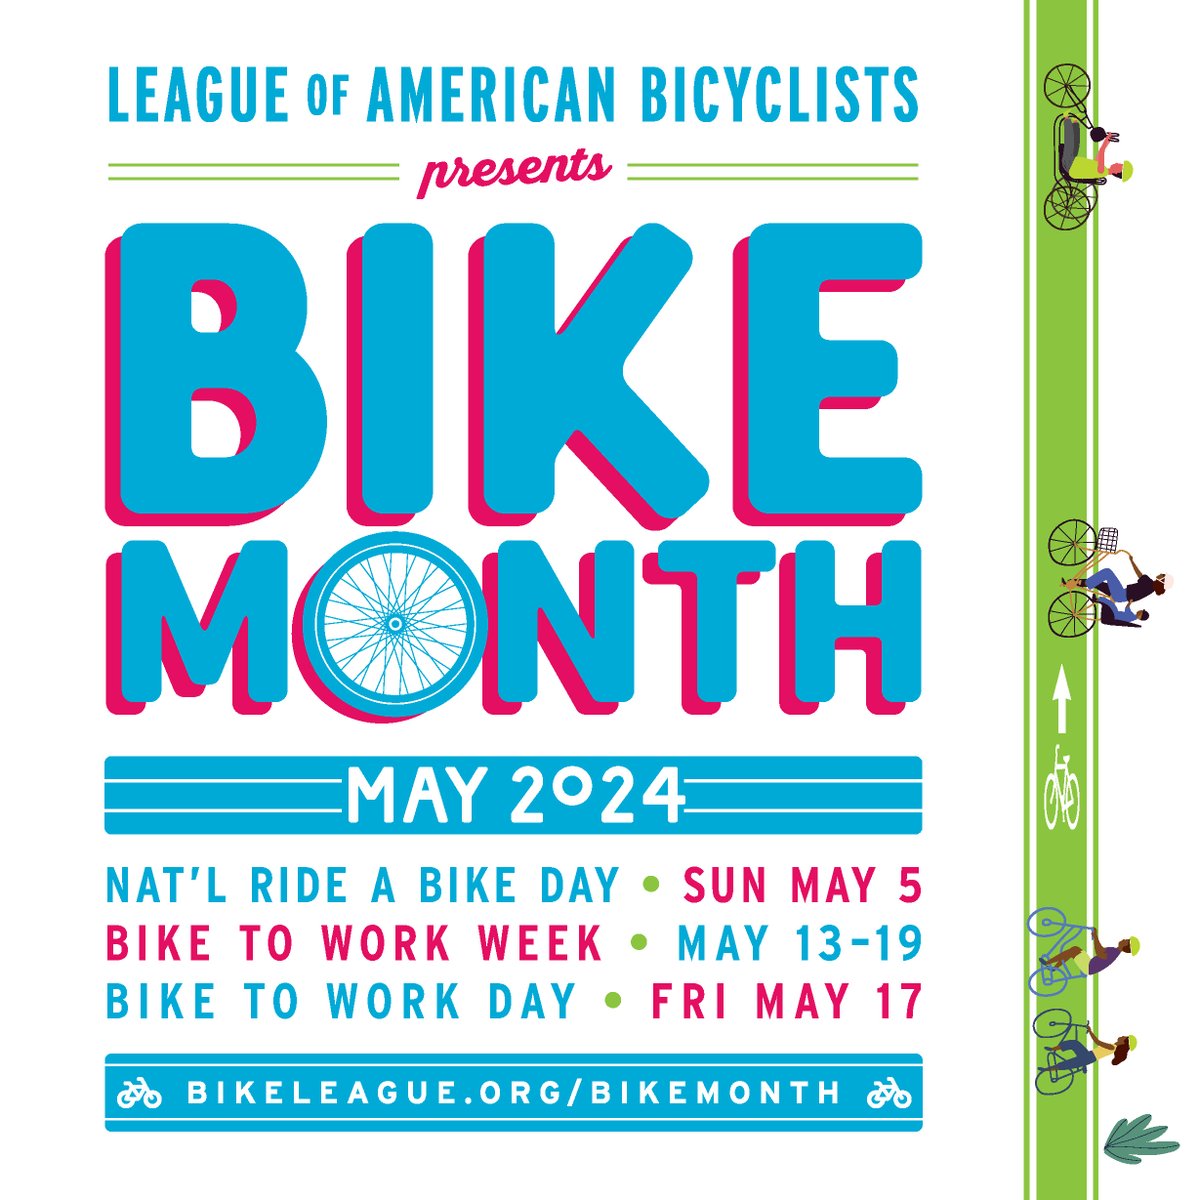 May is #NationalBikeMonth! Biking brings people together, can integrate physical activity into our daily routines, curbs your carbon footprint, and reduces other driving costs while reducing traffic congestion. Let us know where you plan to bike this month! 🚲 @BikeLeague